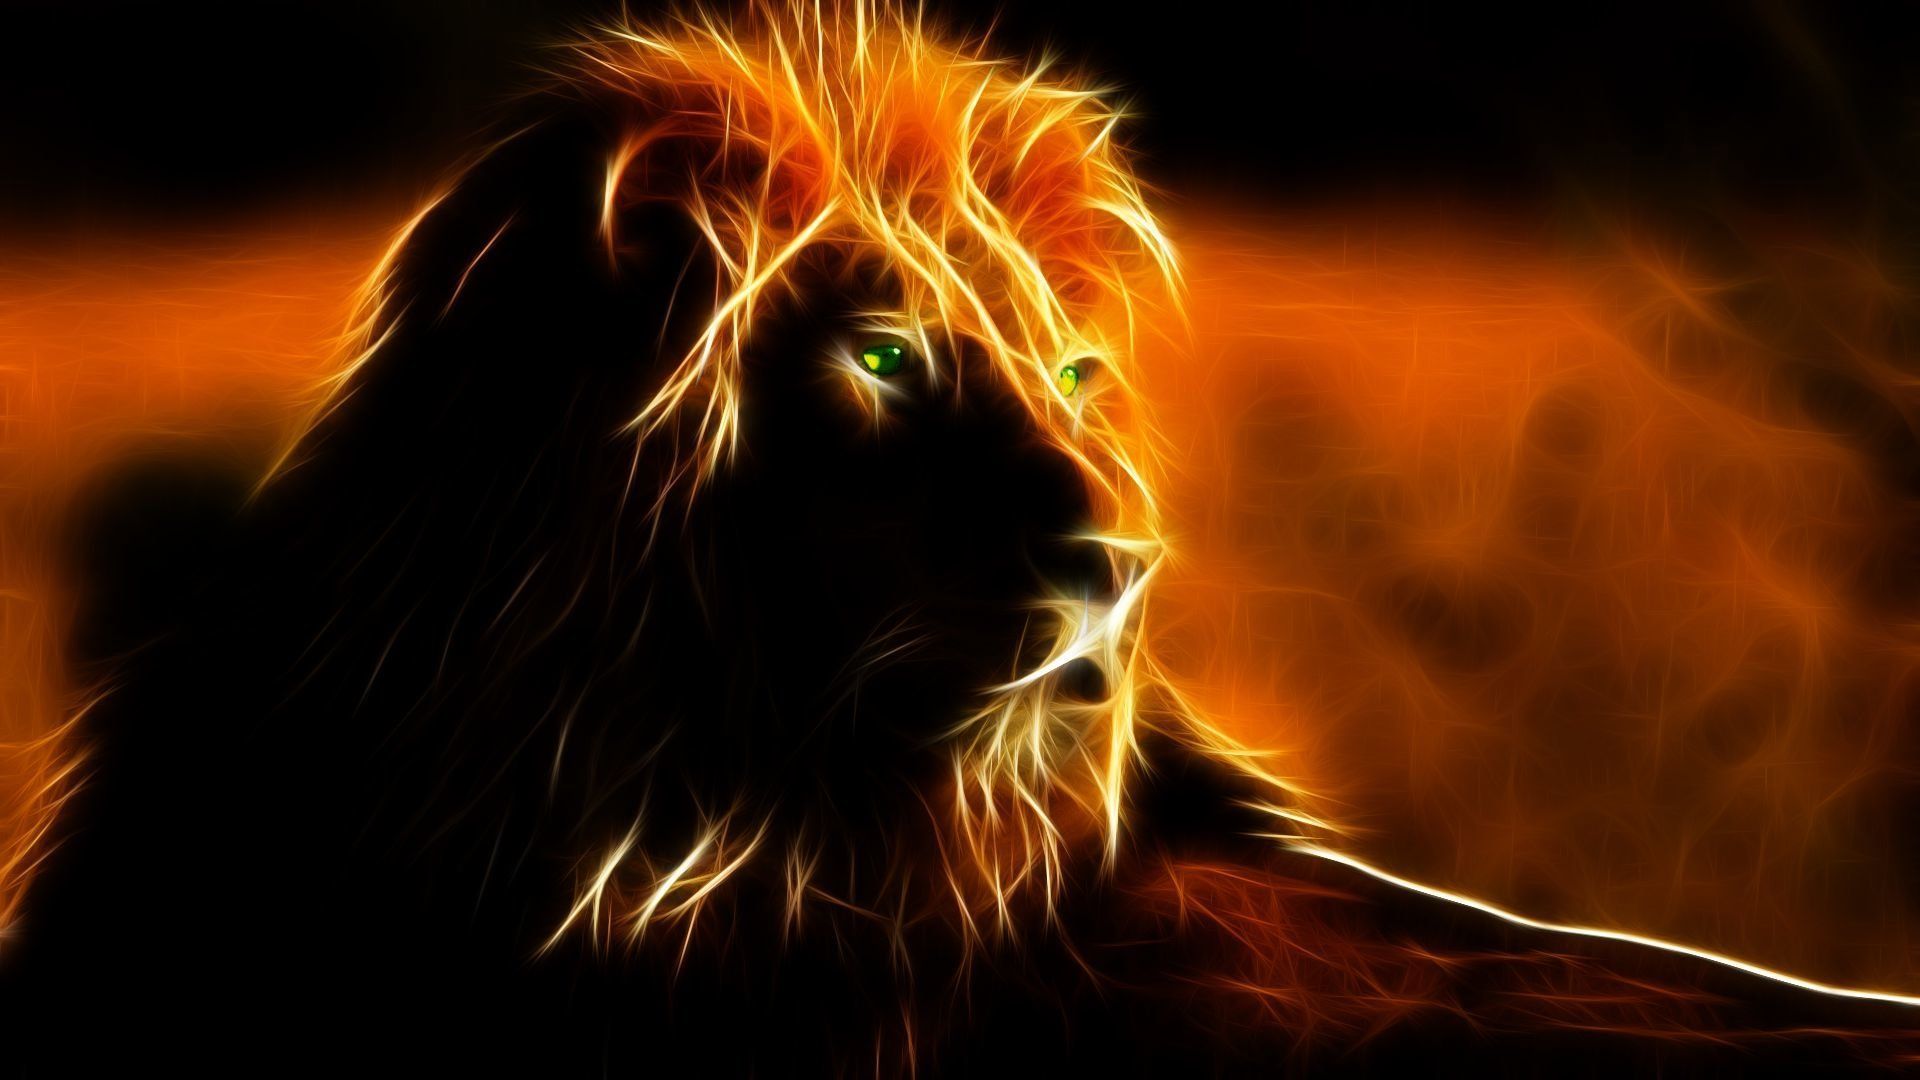 Cool Fire Lion Wallpaper Free Cool Fire Lion Background